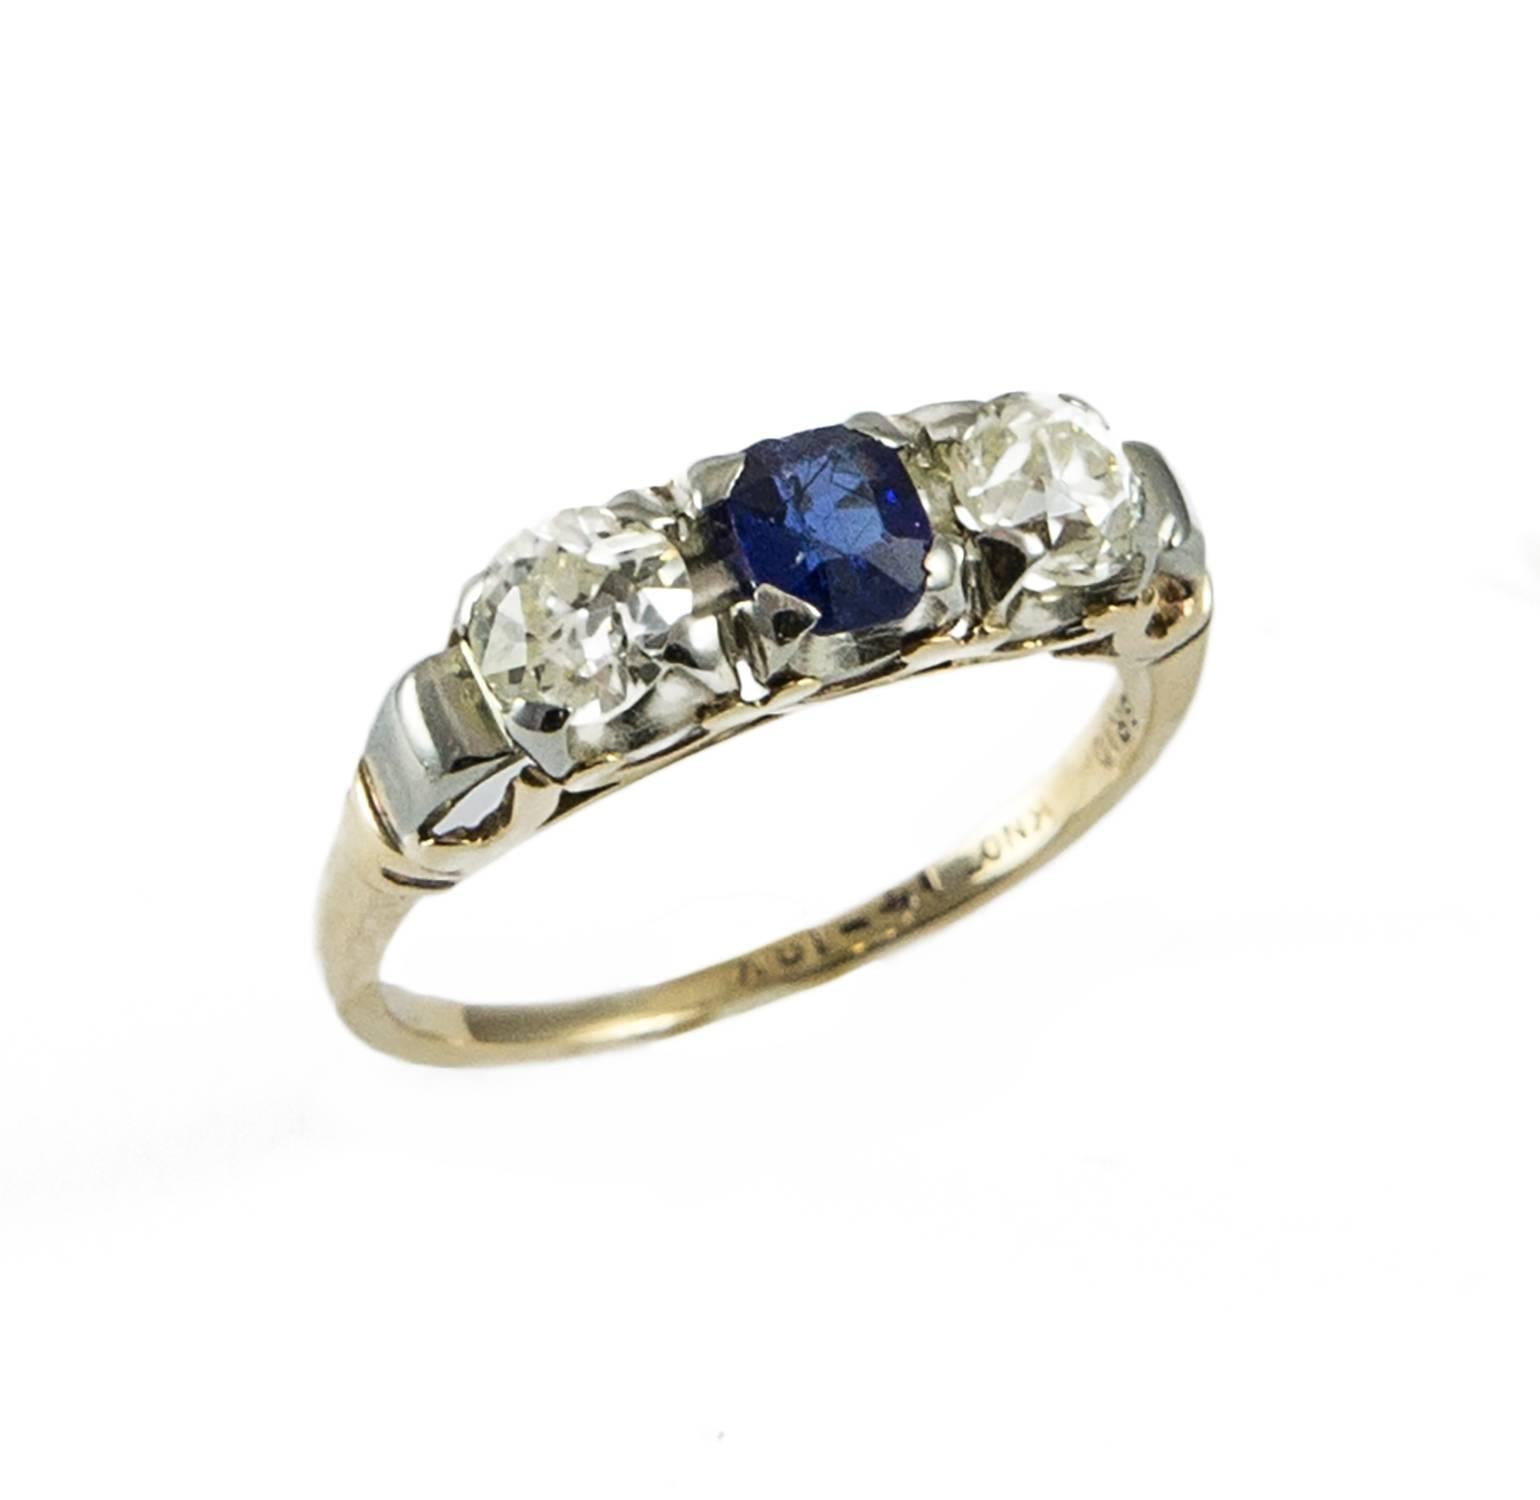 A vintage three stone diamond and sapphire ring set in 18k yellow and white gold. The two old European cut diamonds total (.59 tw. SI-I1, J-K). The bright blue sapphire weighs .40 ct. The mount is custom made with hand finishing and this ring would